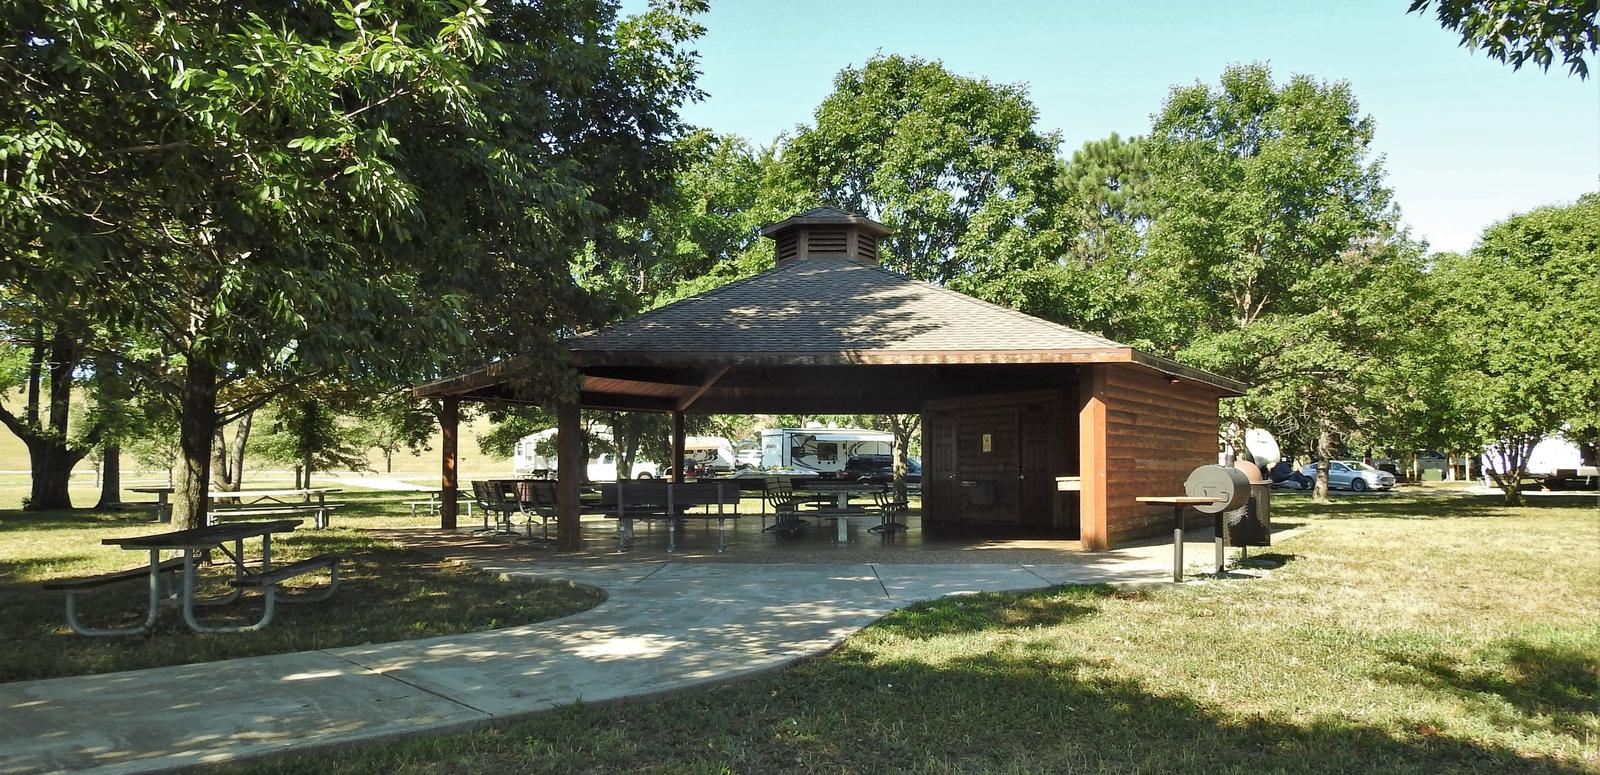 Pavilion in Outlet Campground